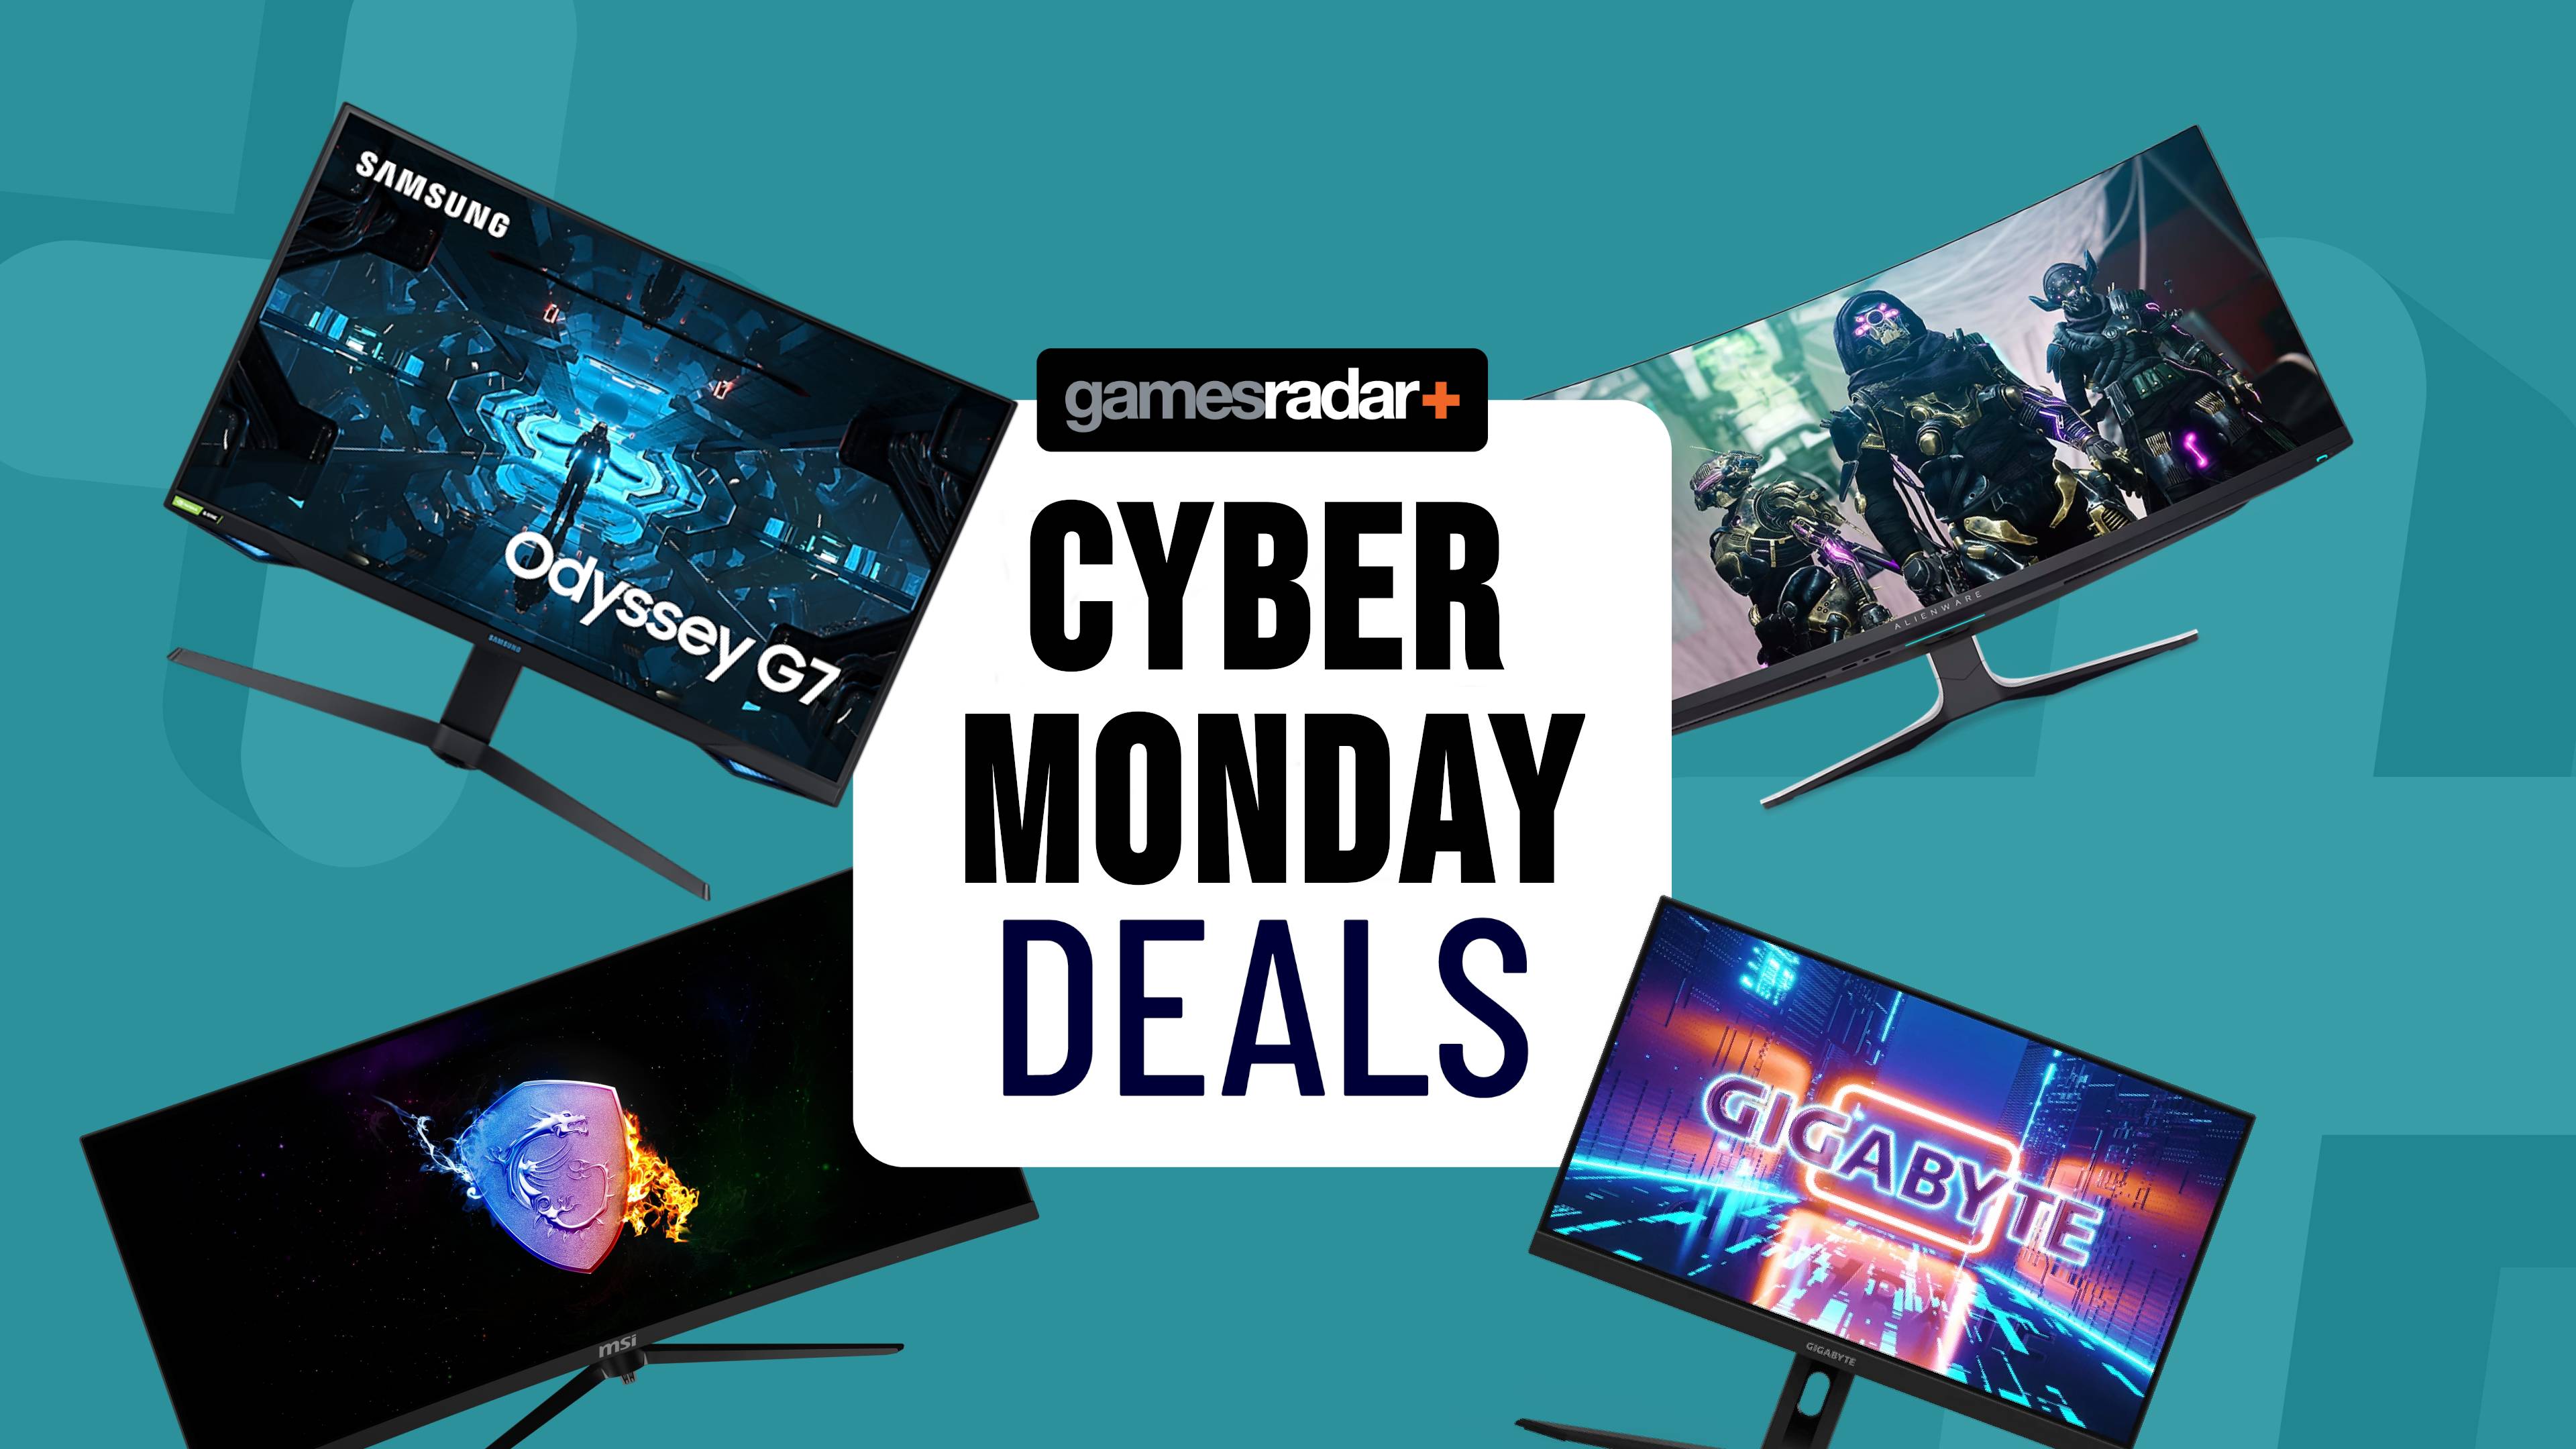 Cyber Monday gaming monitor deals live: all the biggest discounts across 4K, 1440p, and 144Hz screens and more